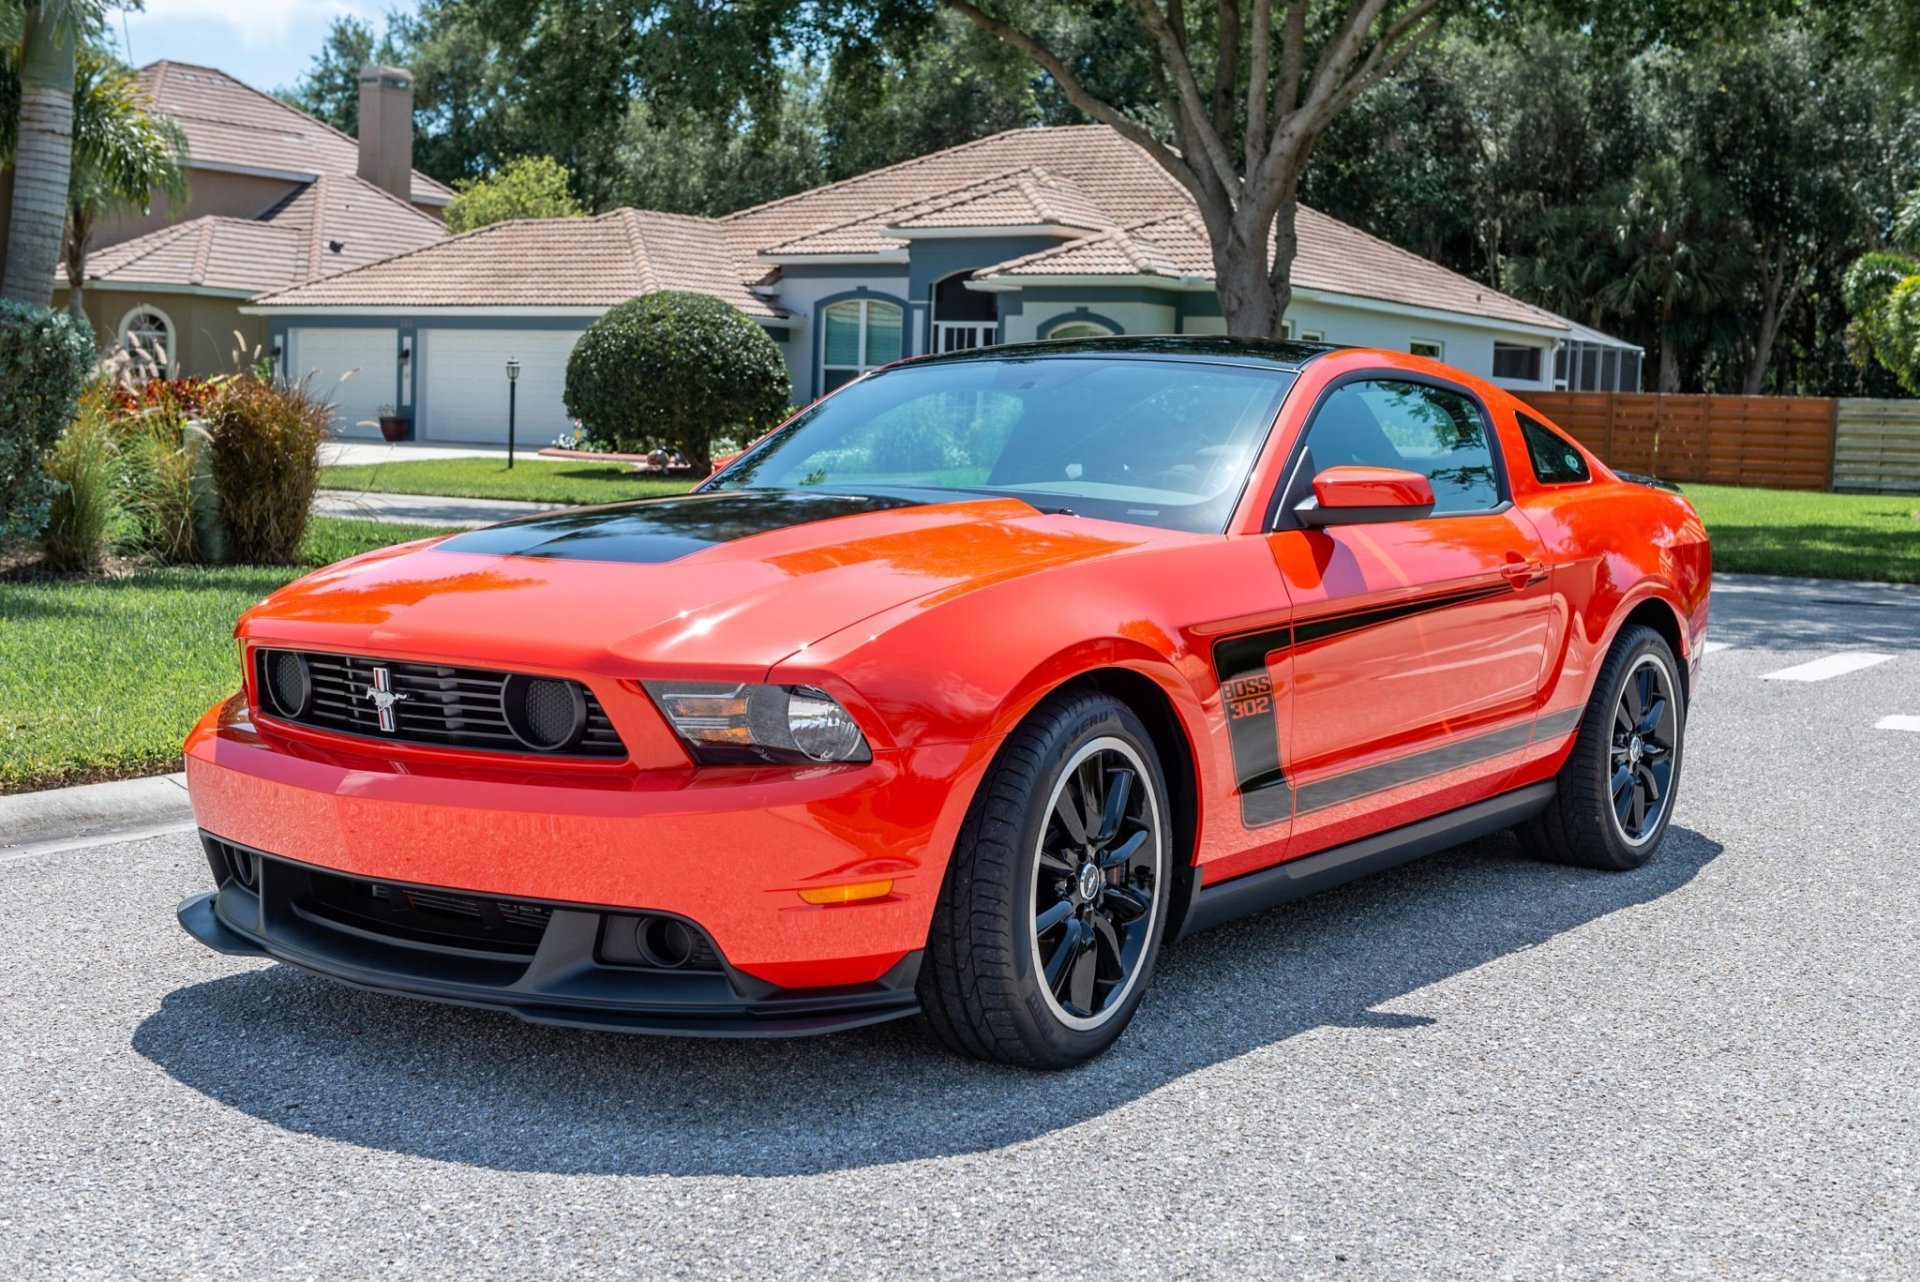 2012 Ford Mustang Boss 302 Image Abyss